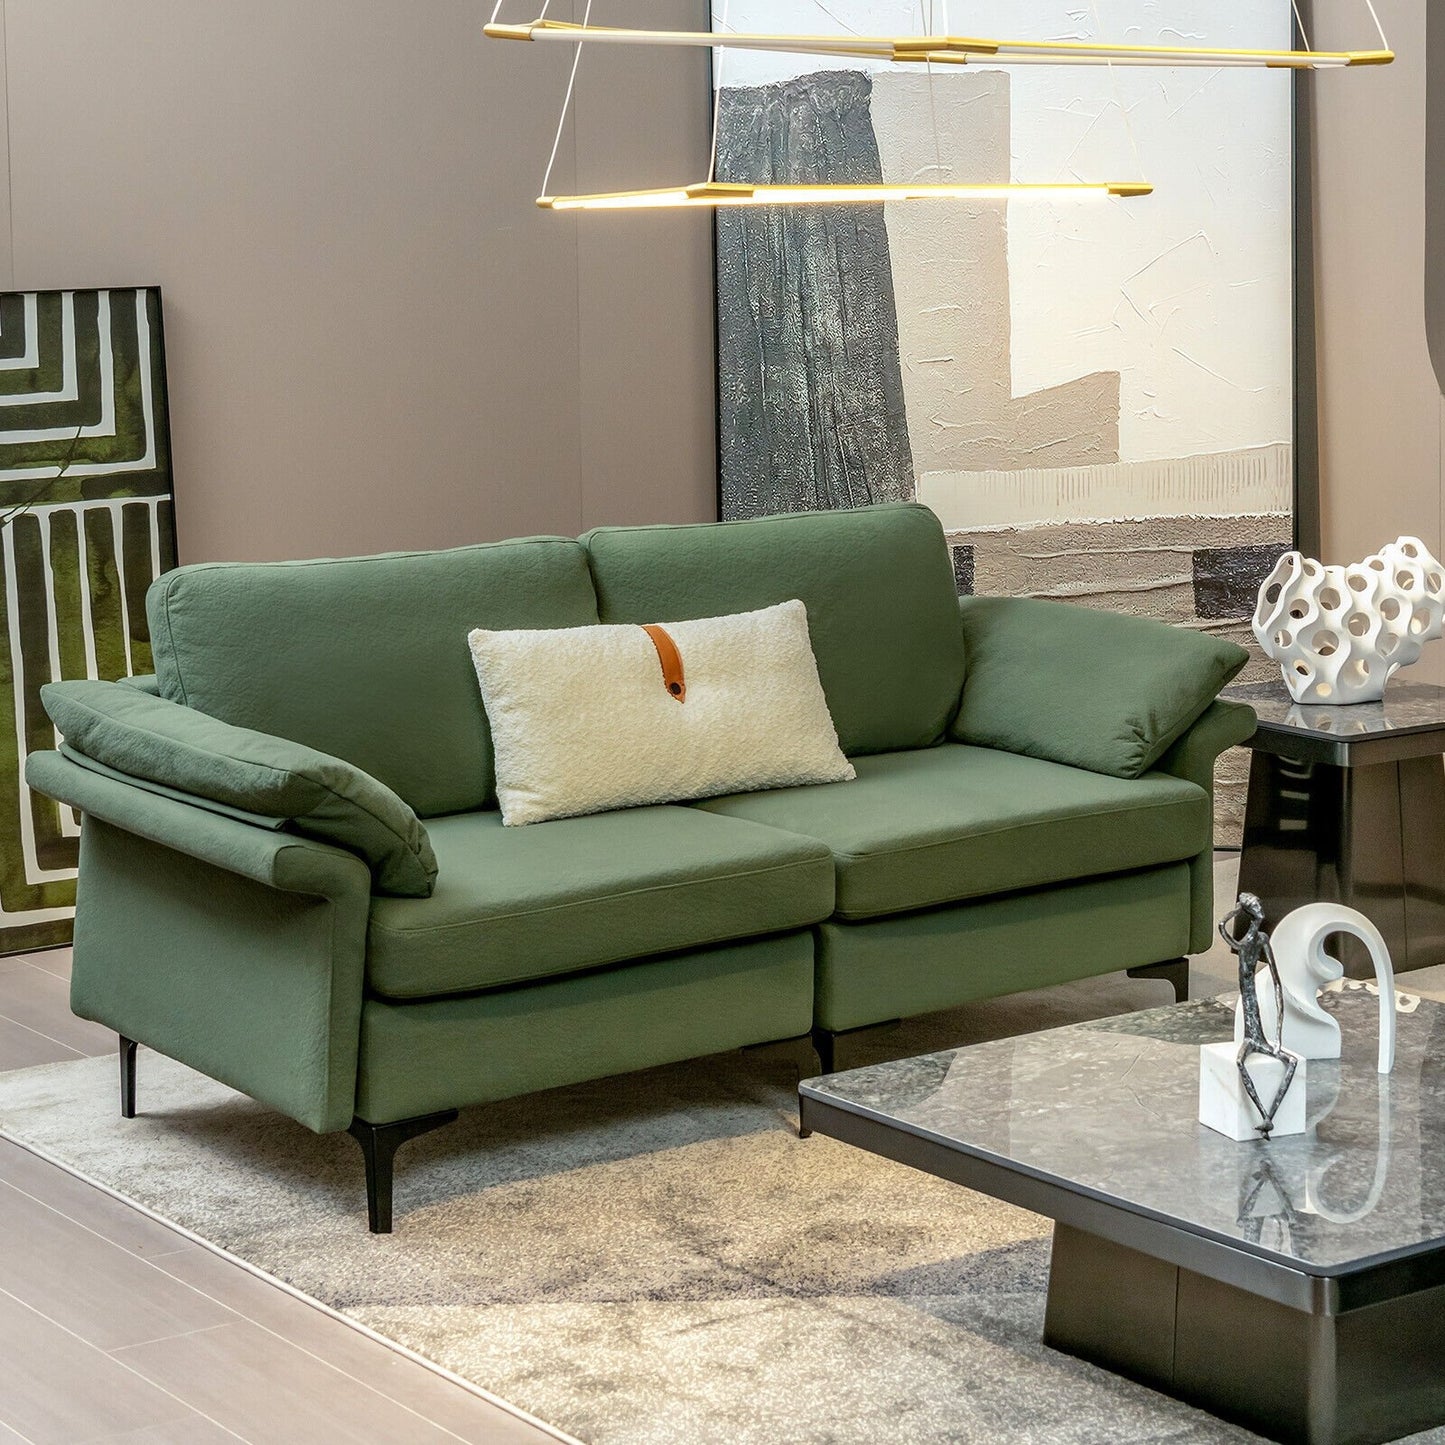 Modern Fabric Loveseat Sofa for with Metal Legs and Armrest Pillows, Army Green